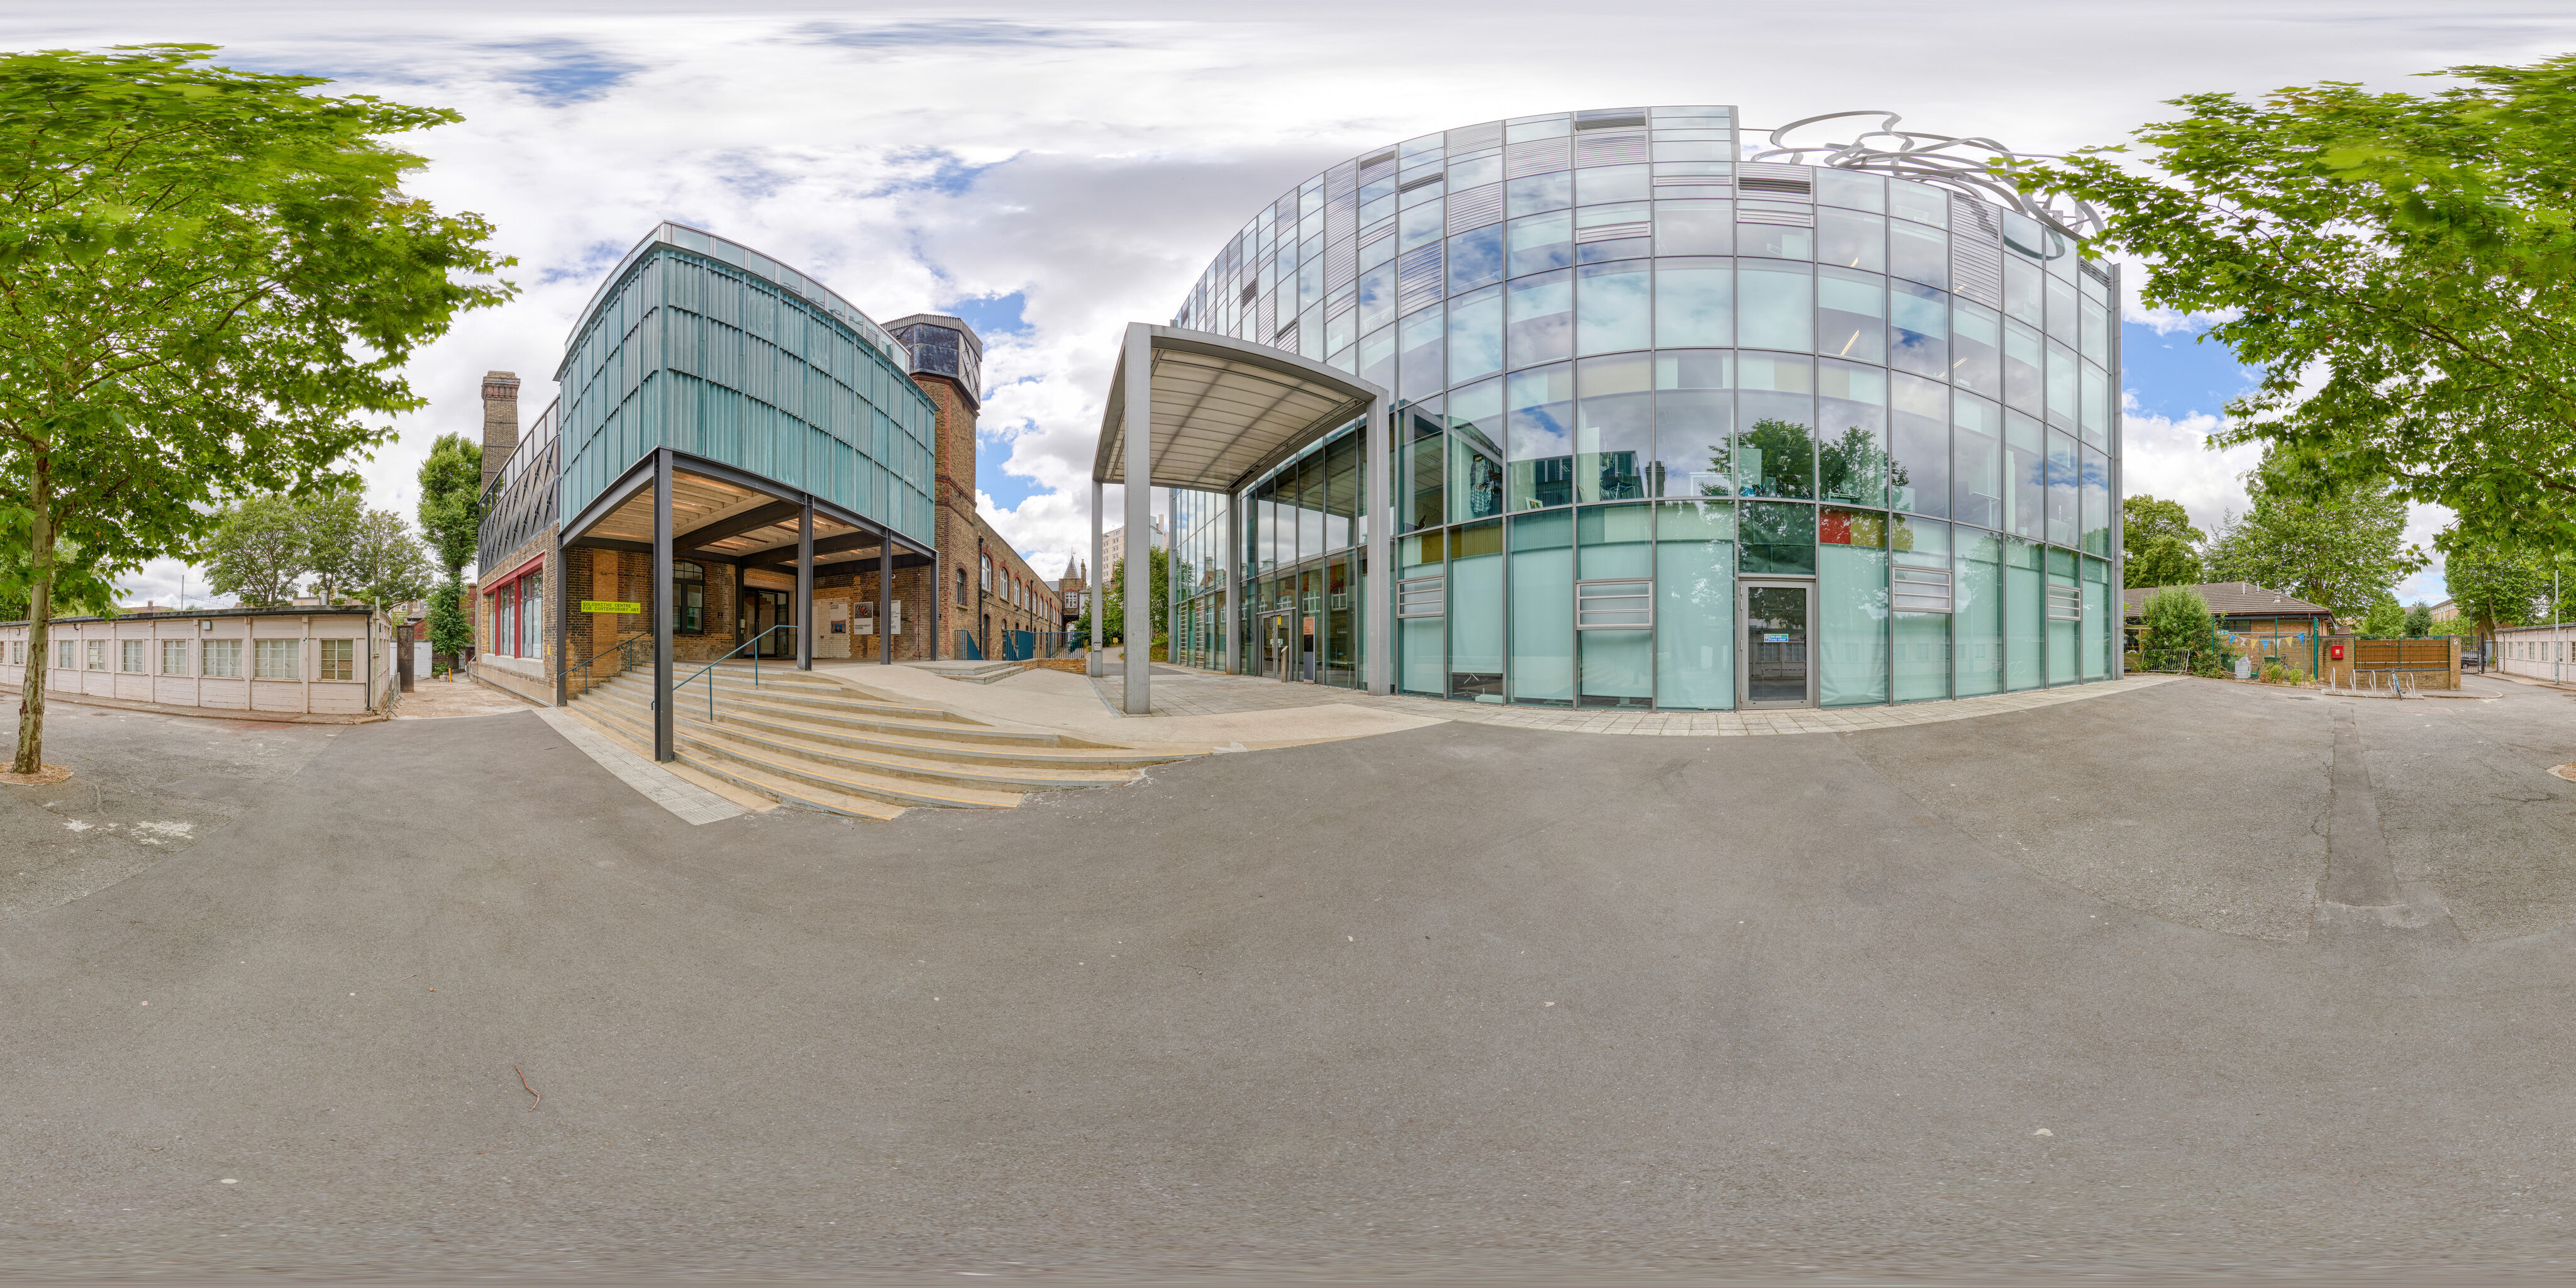 360 of Goldsmiths Centre for Contemporary Art